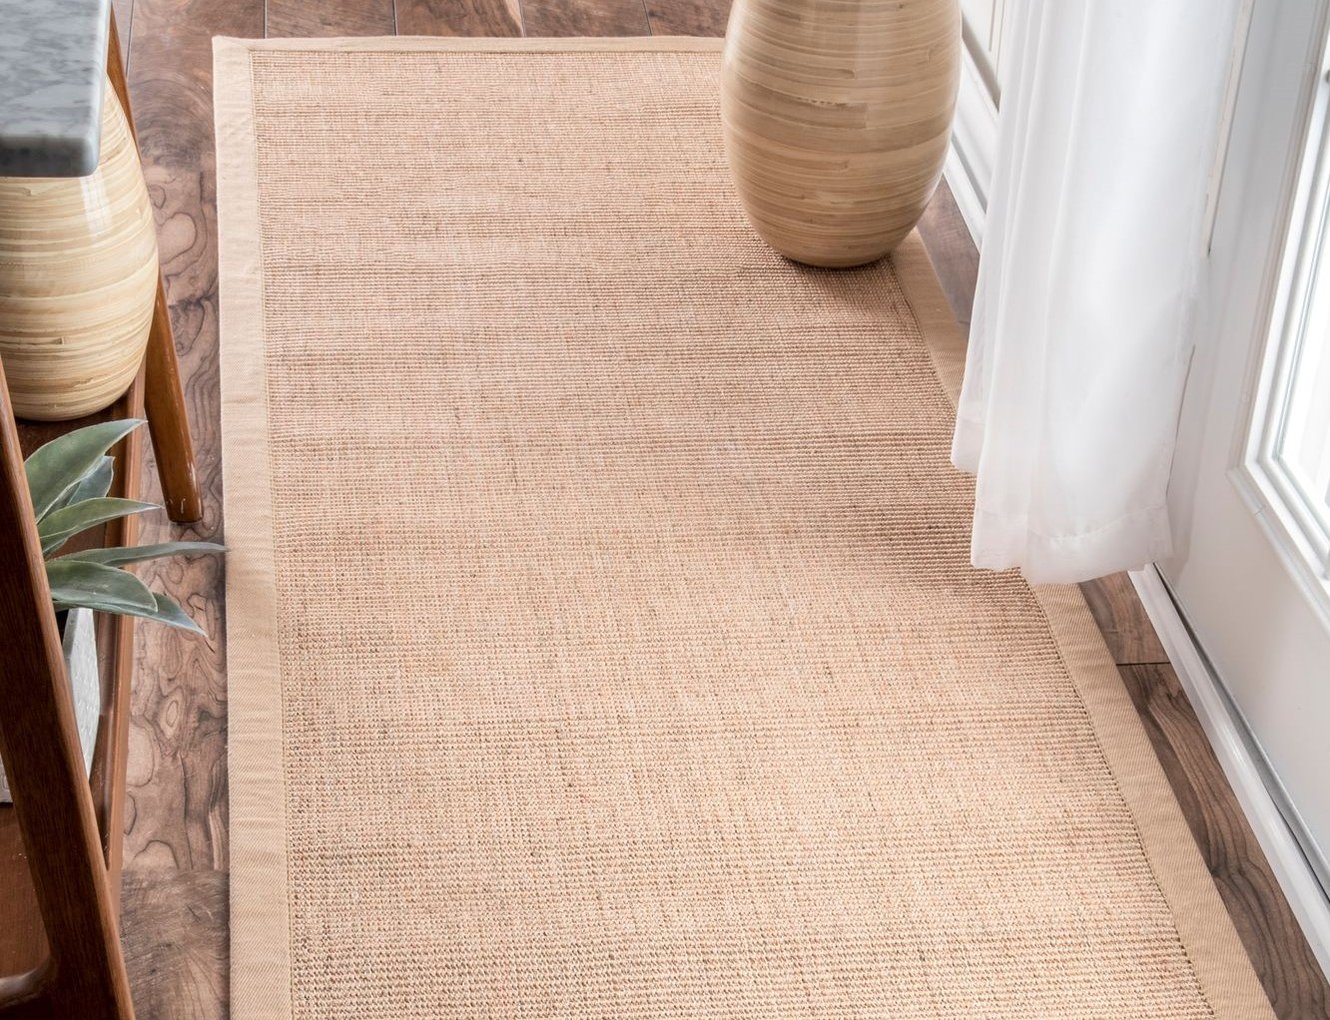 https://imagedelivery.net/ExKHvoWzpvFxpqockAGXOw/images/blog/2020/04/Machine-Woven-Orsay-Sisal-Rug-from-Natura-Sisal-by-NuLoom.jpg/fit=crop,width=1330